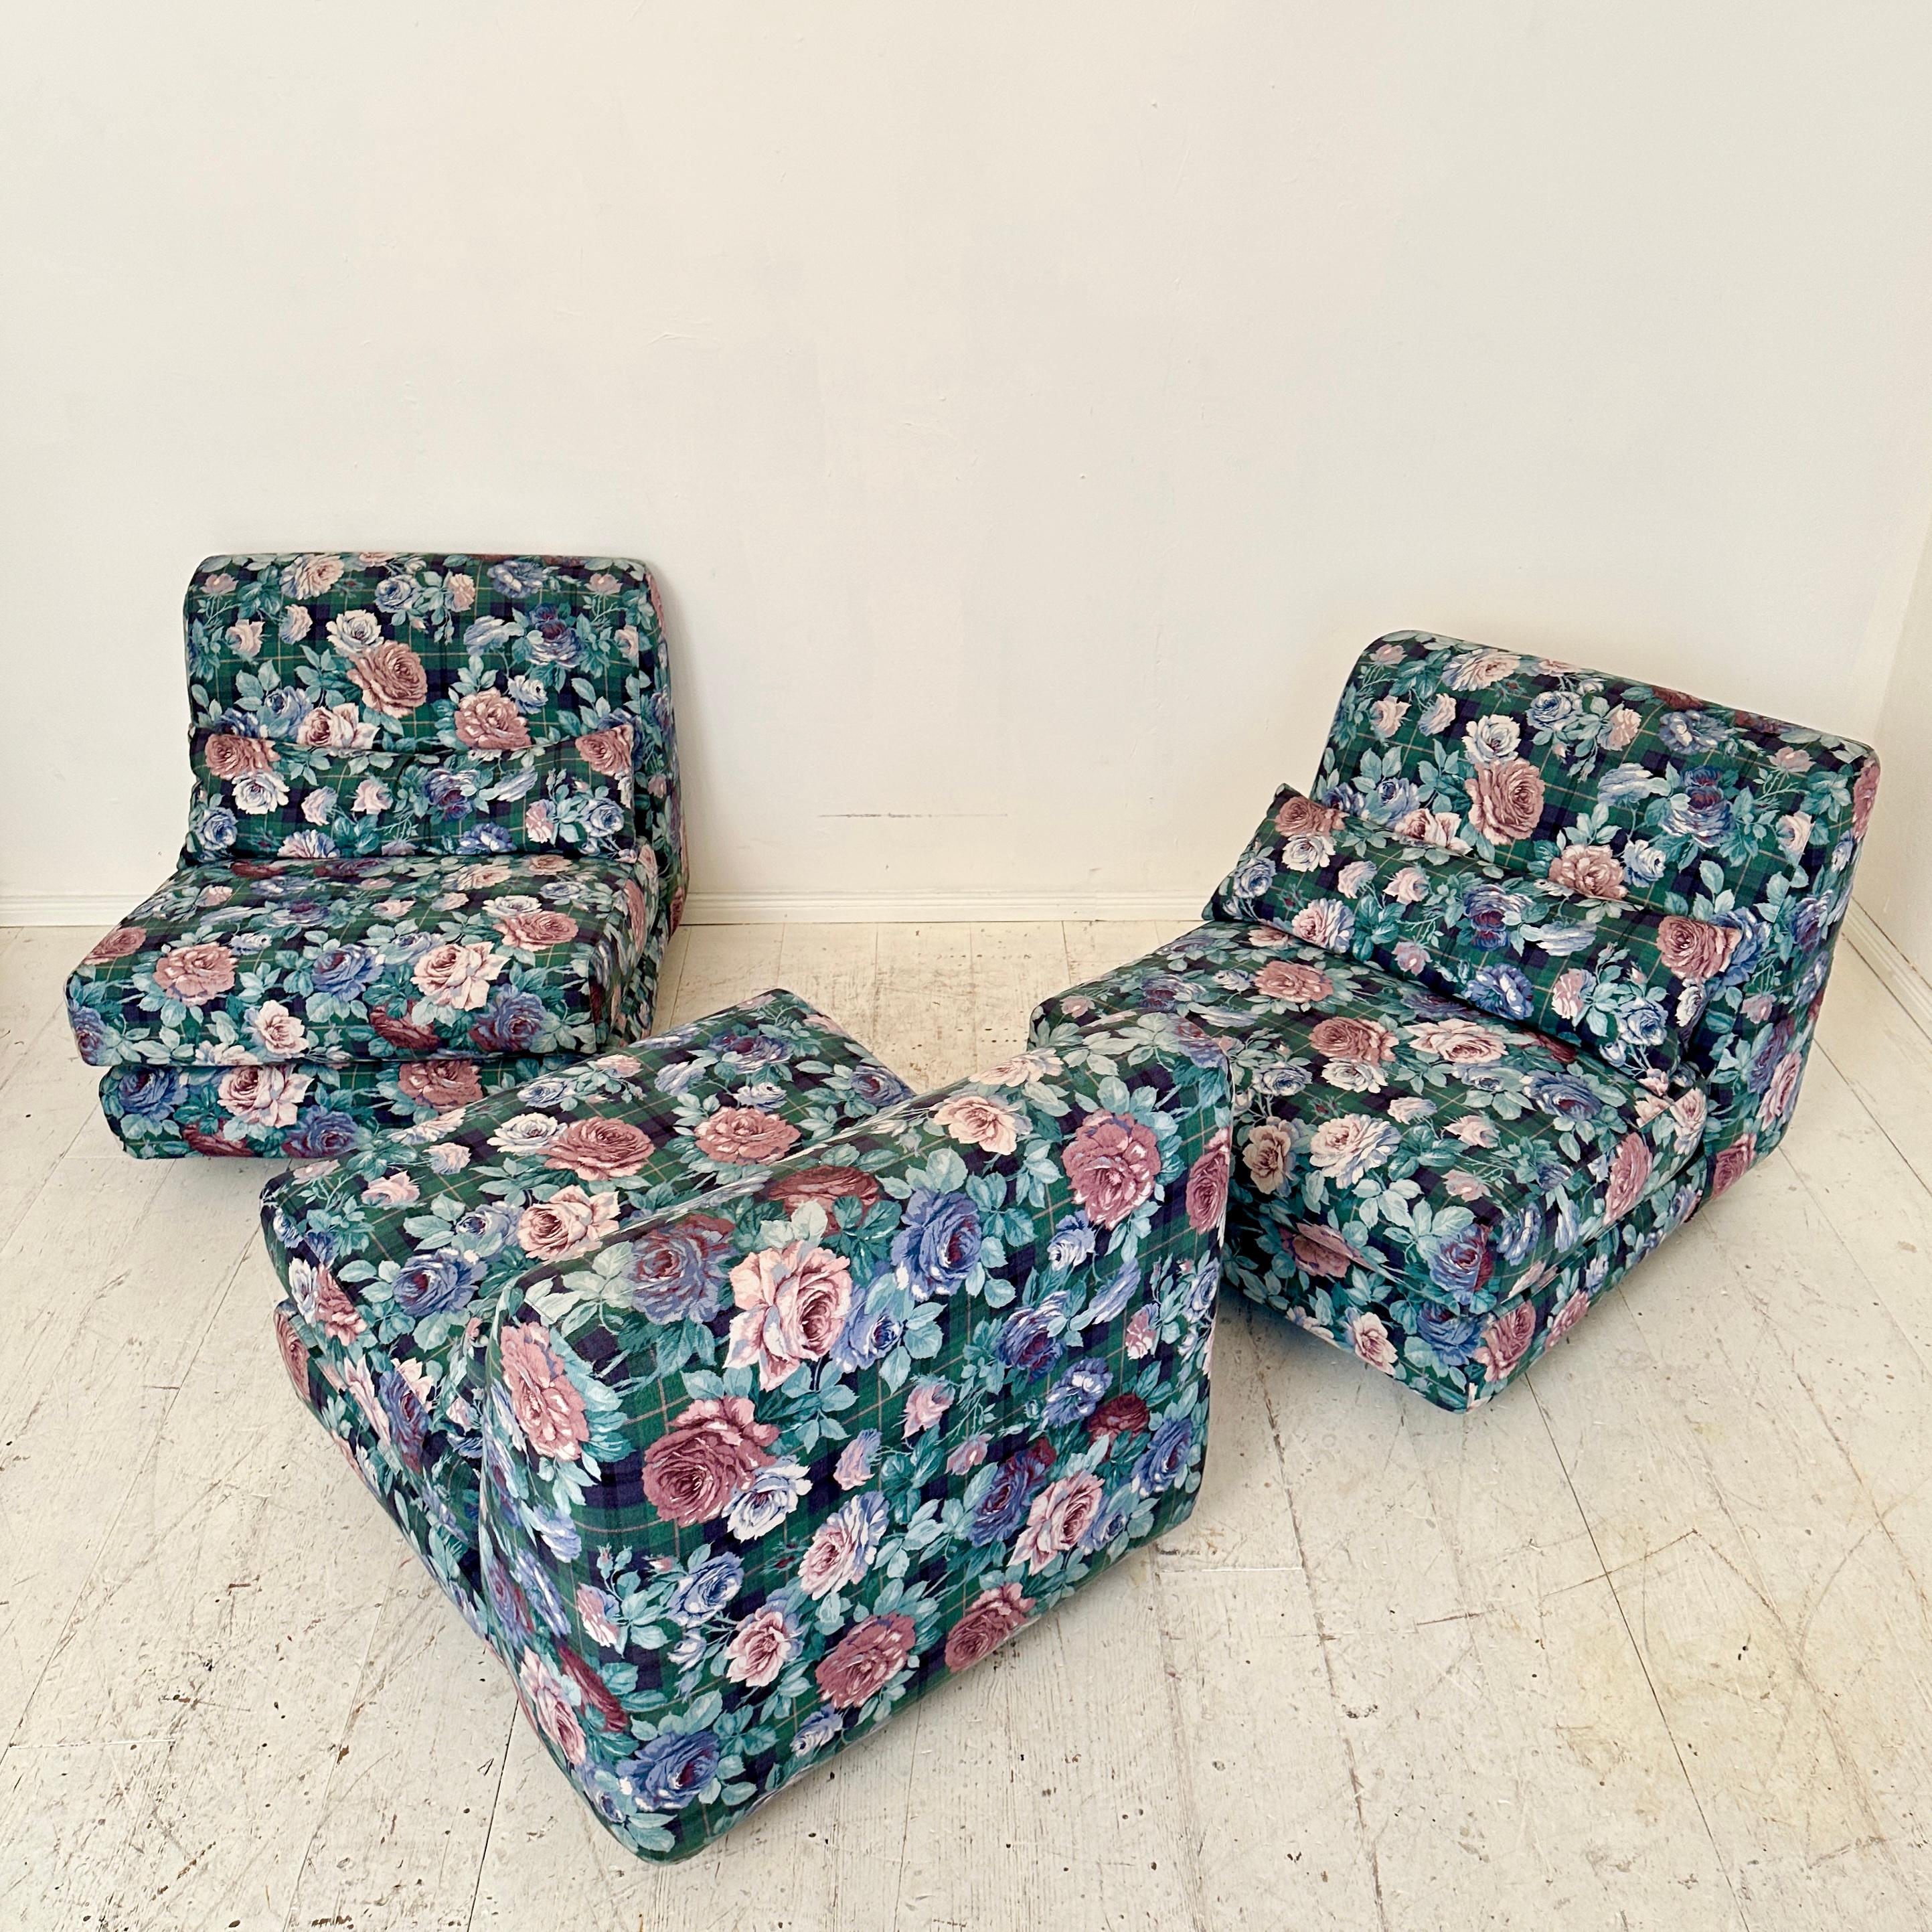 Mid Century Italian Modular Sofa in 3 Pieces with a Flower Fabric, around 1970 For Sale 5